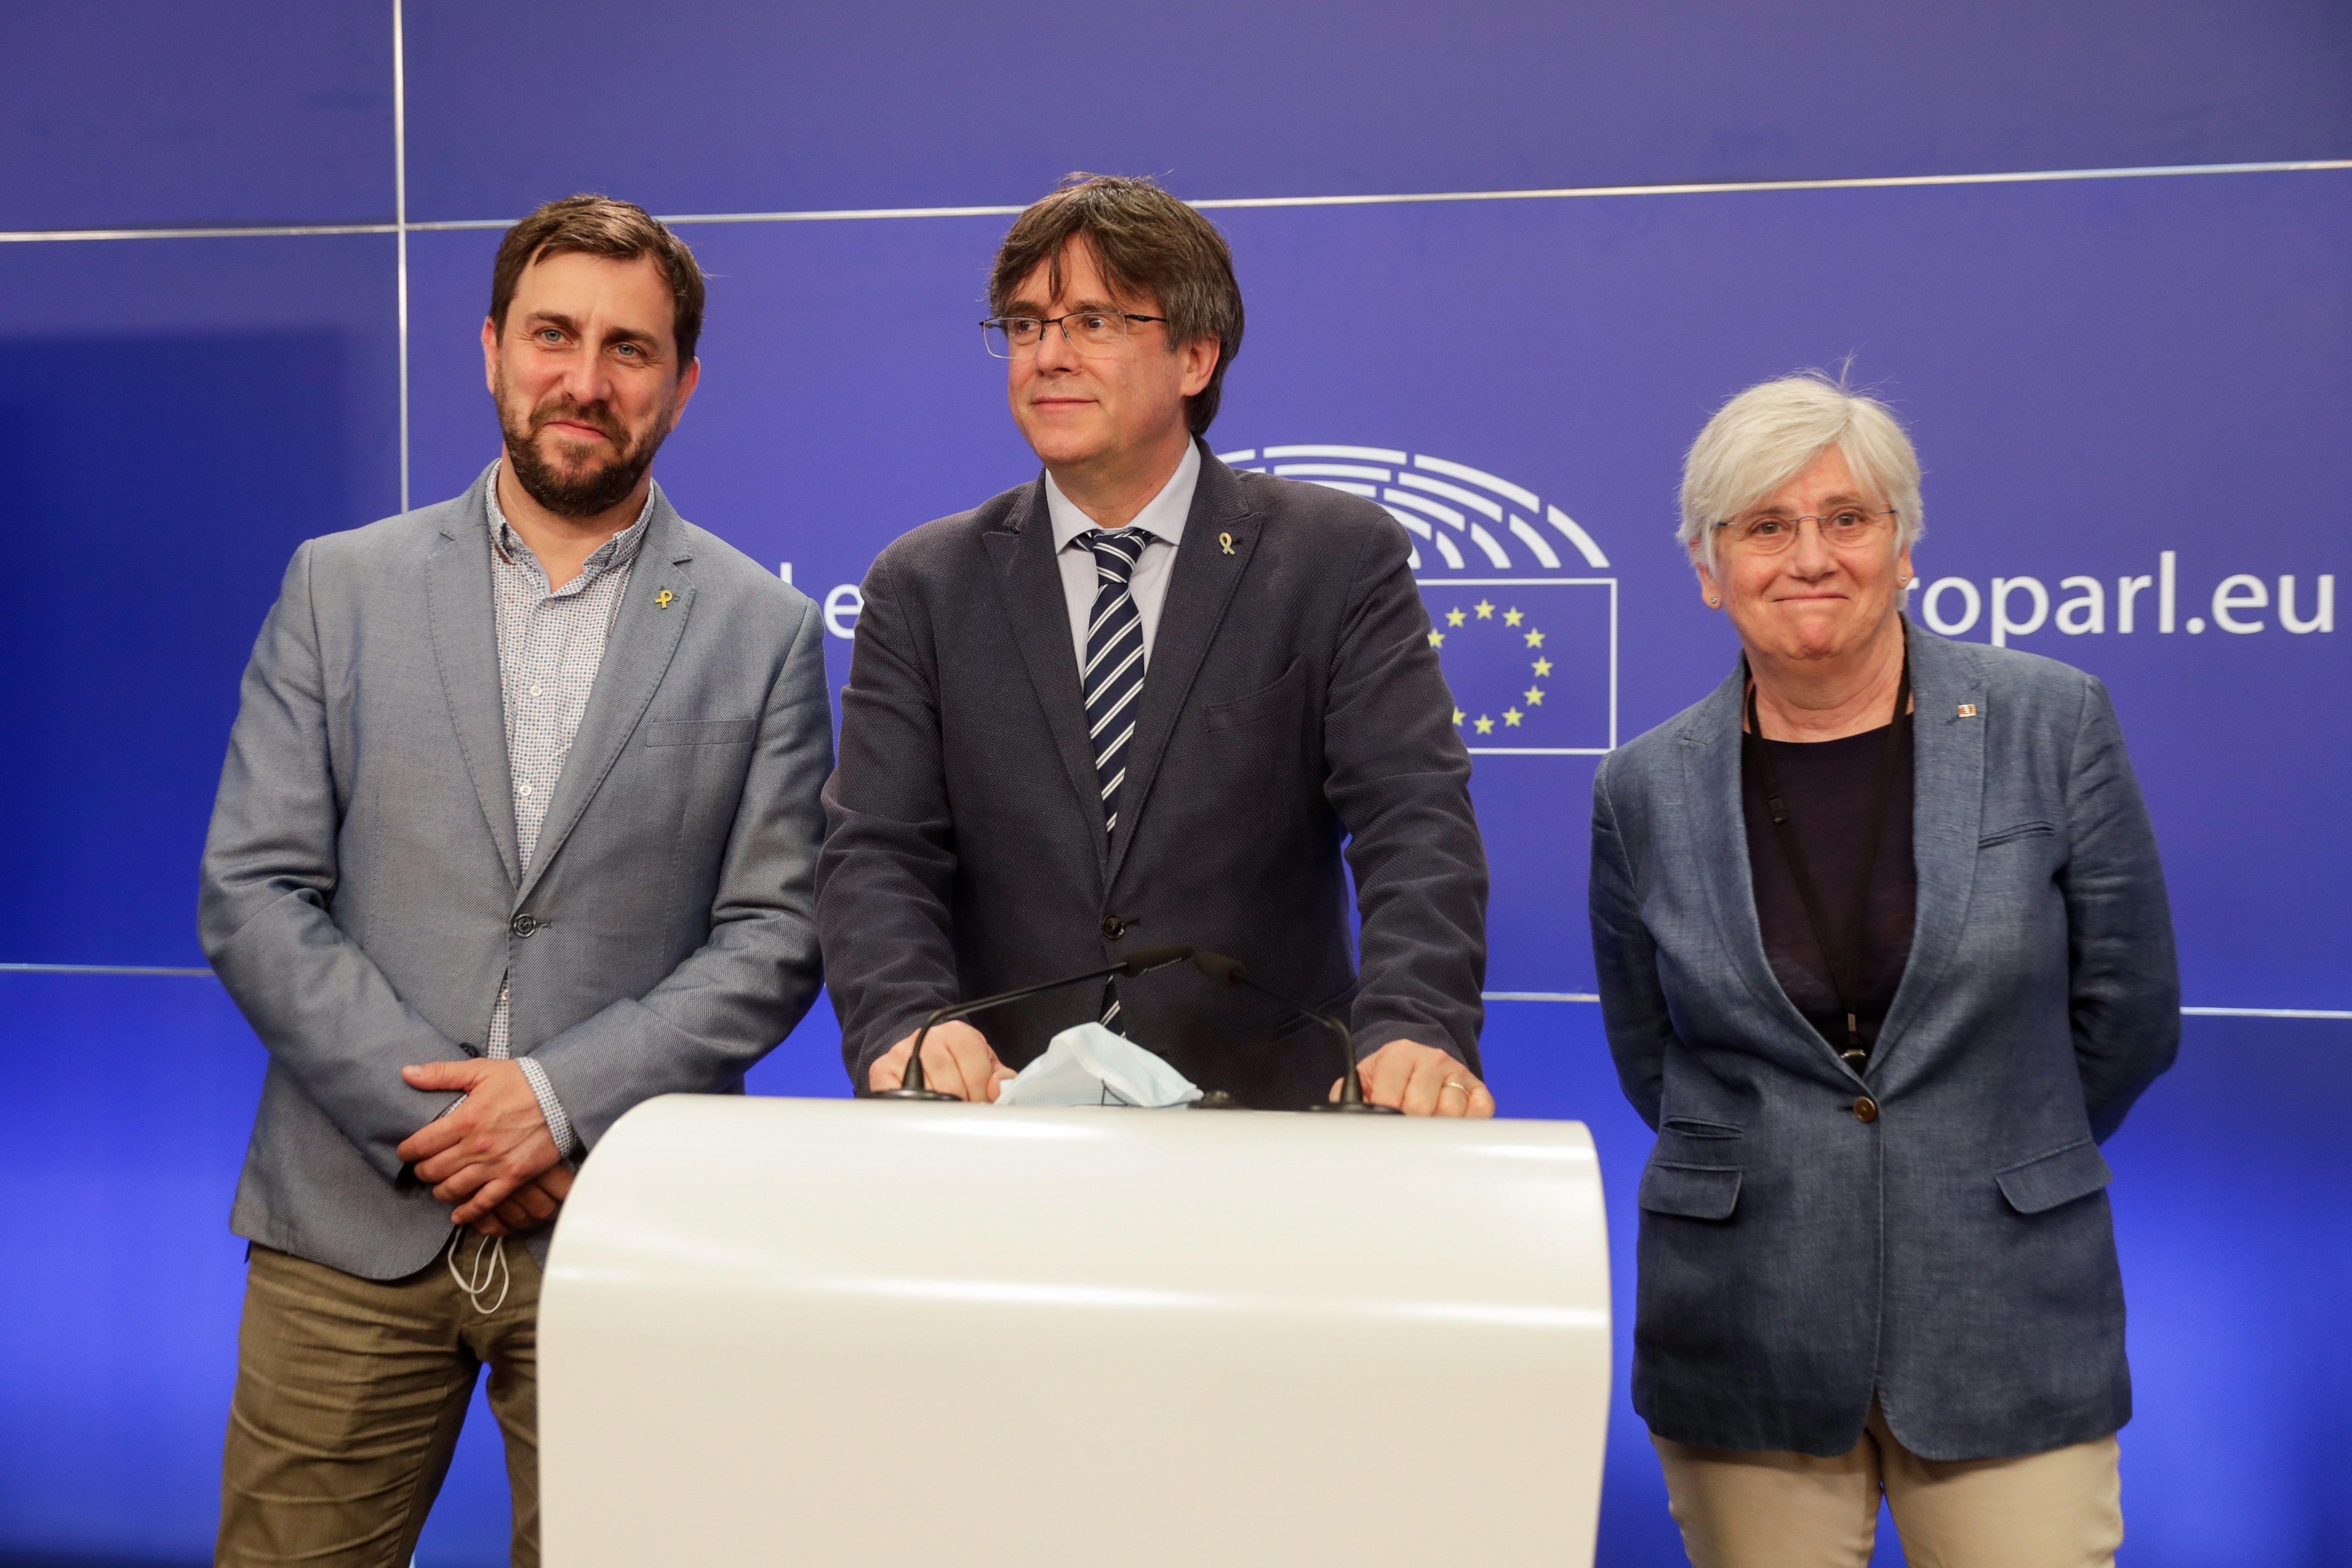 EU court gives warning to Spanish judge: Carles Puigdemont can't be arrested